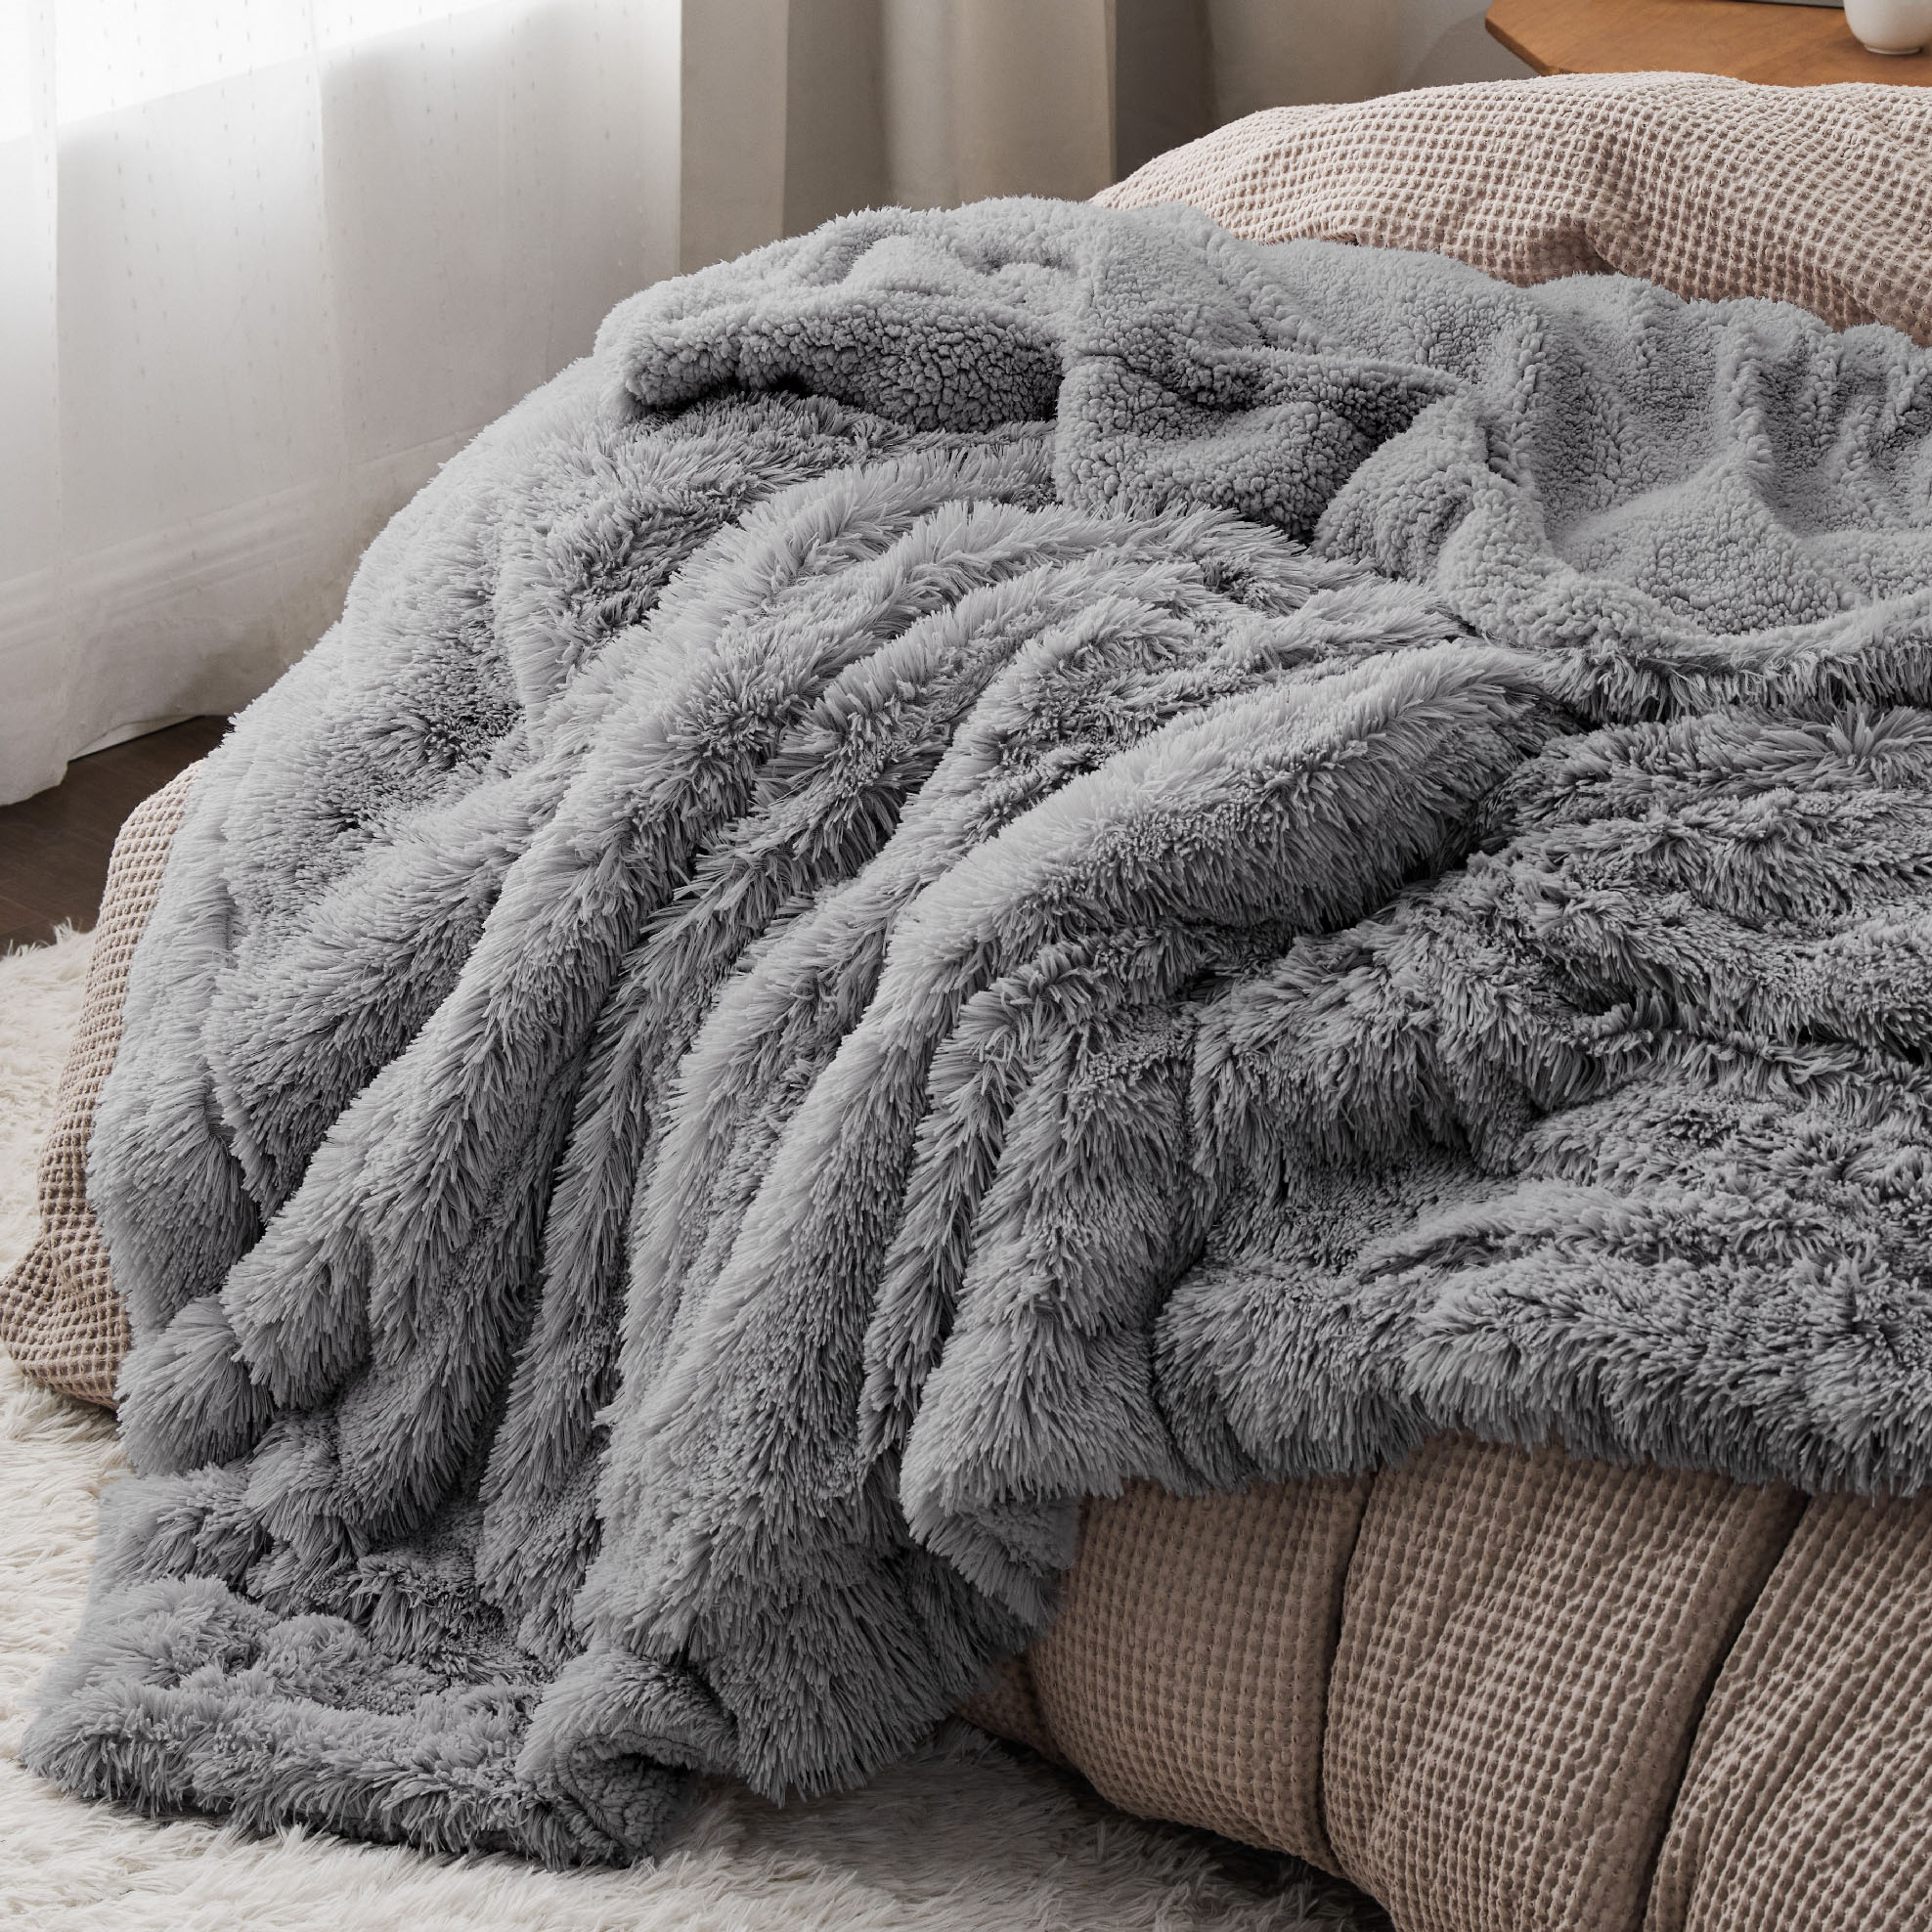 Grey Faux Fur Throw Blanket, Large Black Throw Blanket For Couch And For  Bed, Super Soft Long Hair Shaggy Blanket, Thick, Elegant, Cozy And Fluffy  Mi